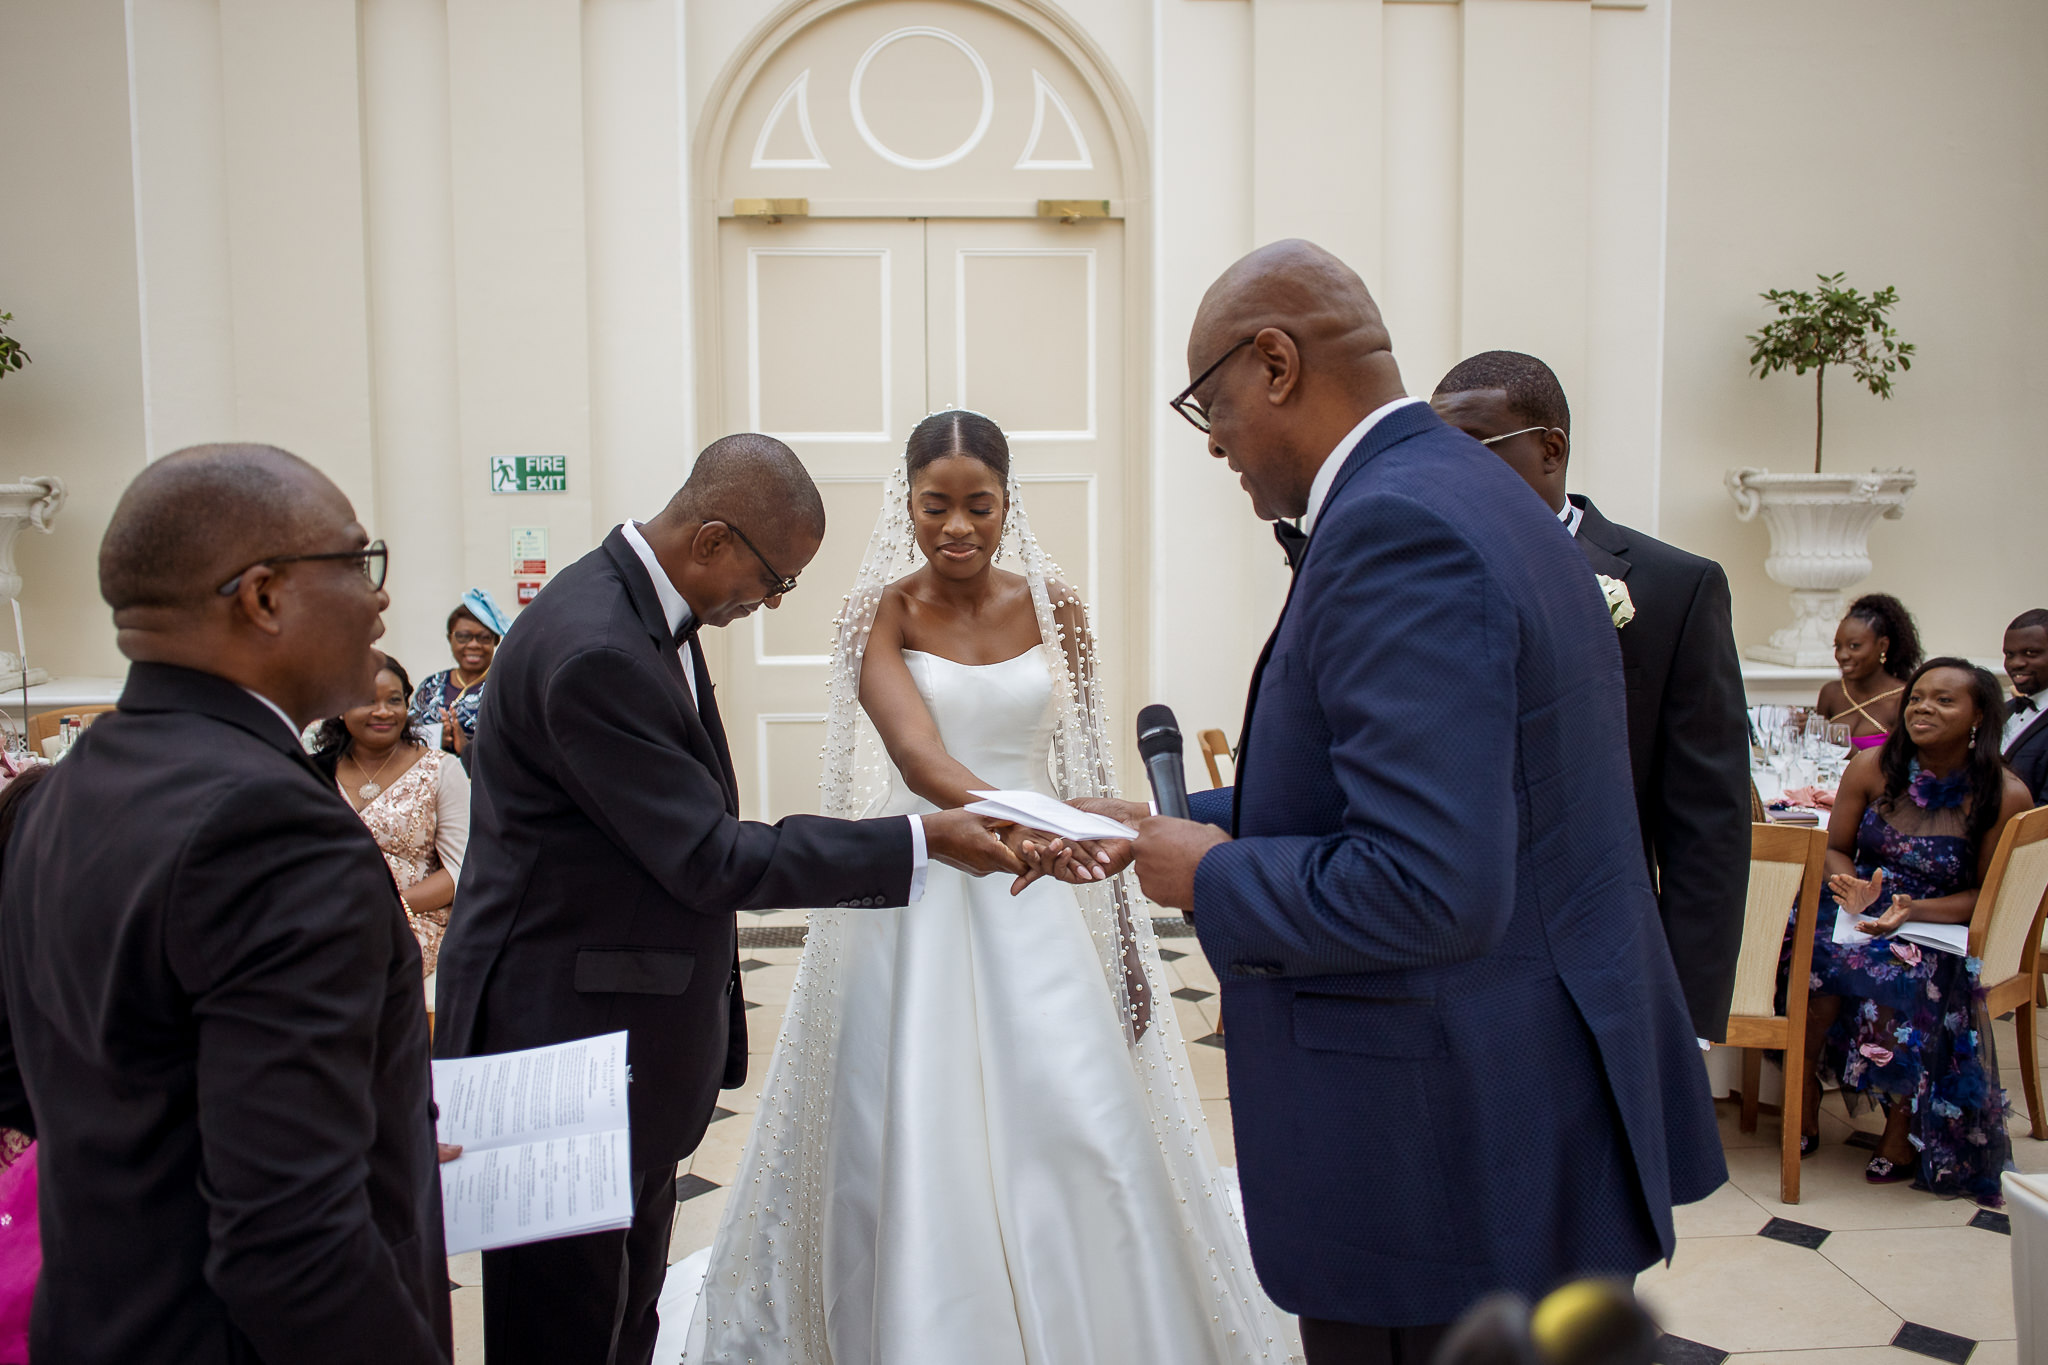 father of the bride gives her hand to the groom